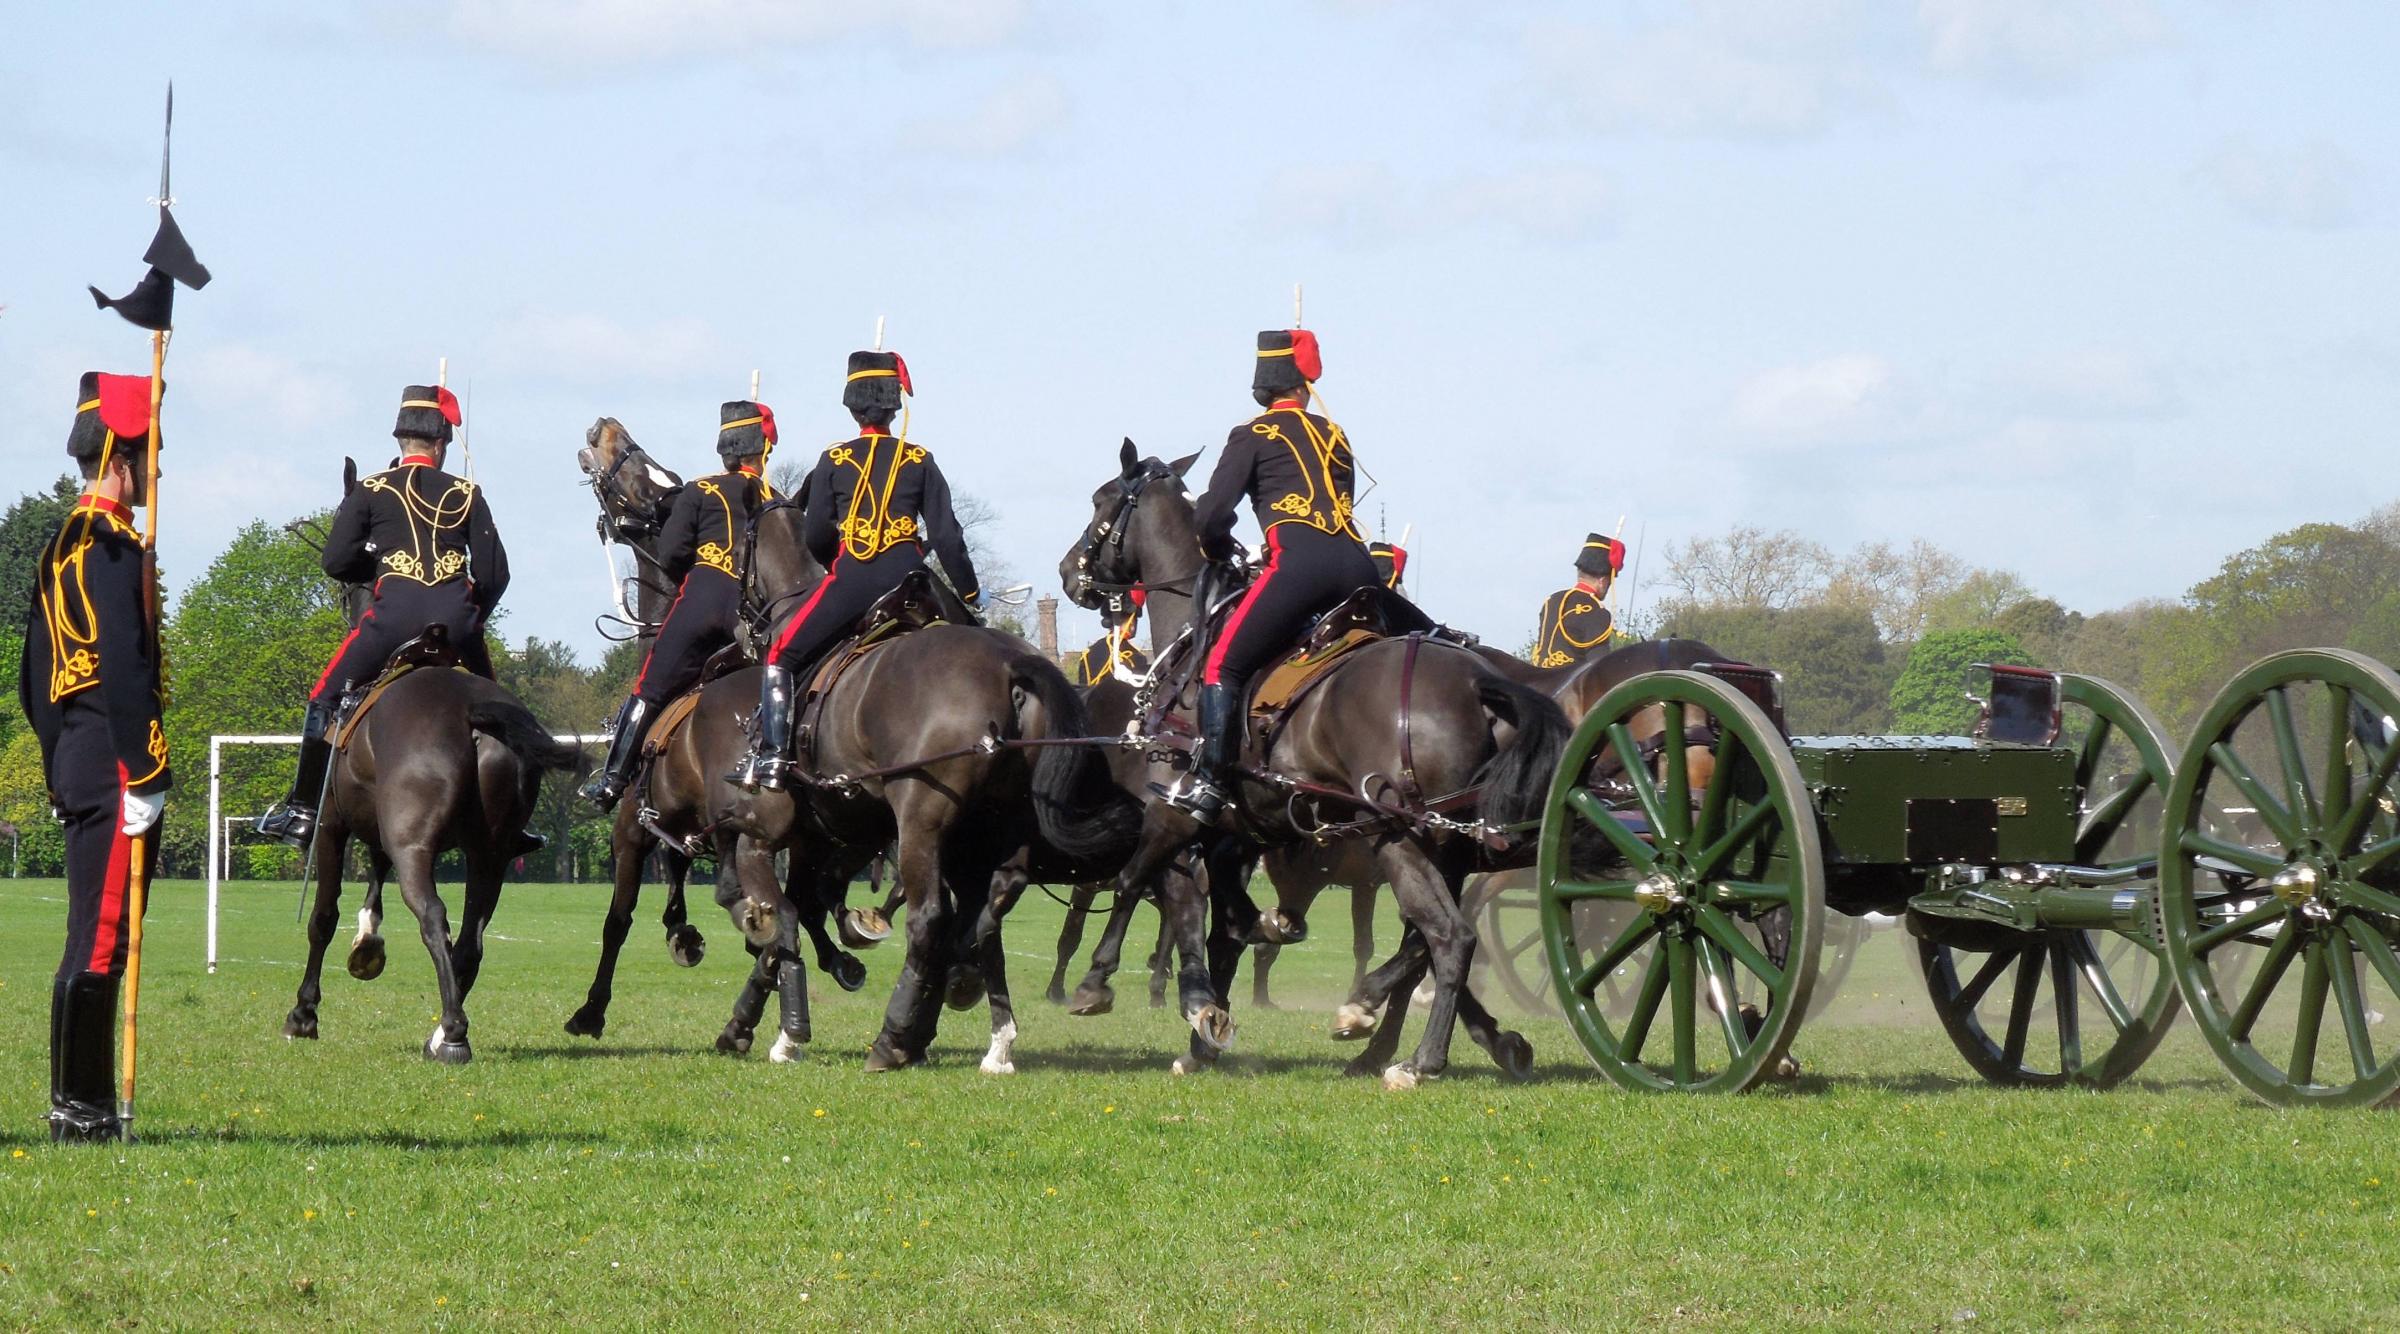 King's Troop soldier taken to hospital with serious injuries after being 'thrown off her horse' in Charlton Park